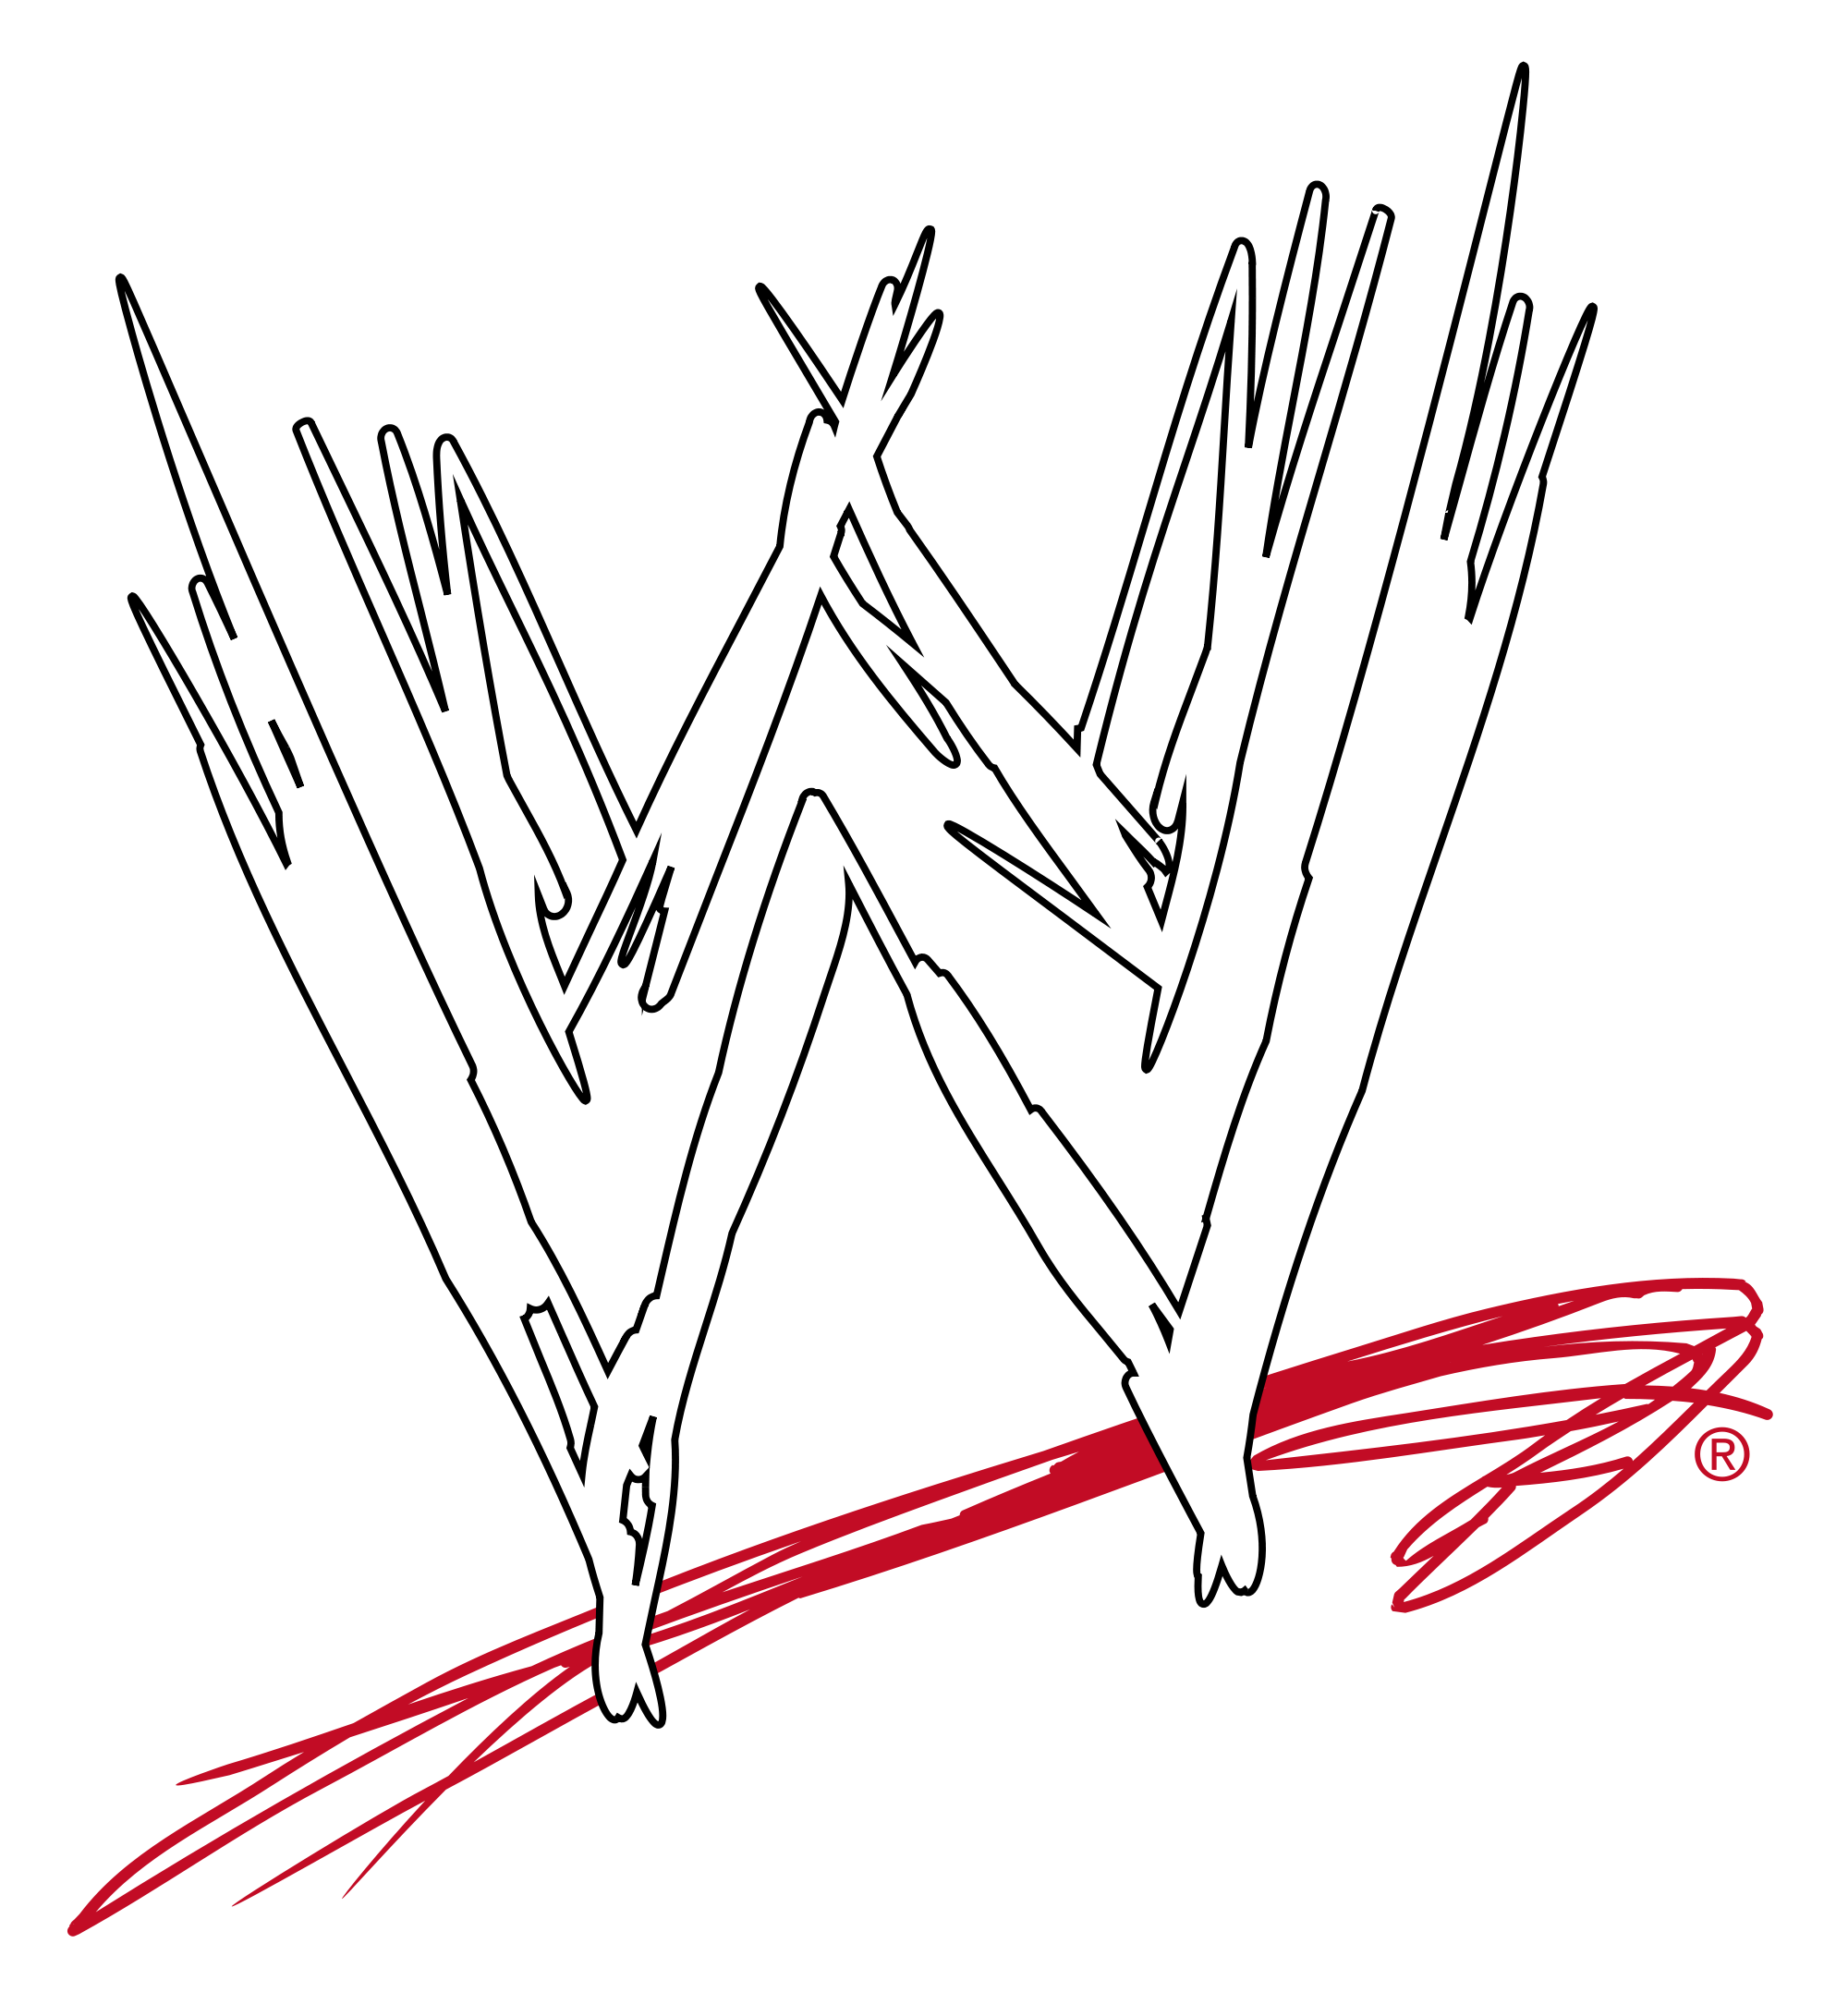 WWE Pay-Per-View